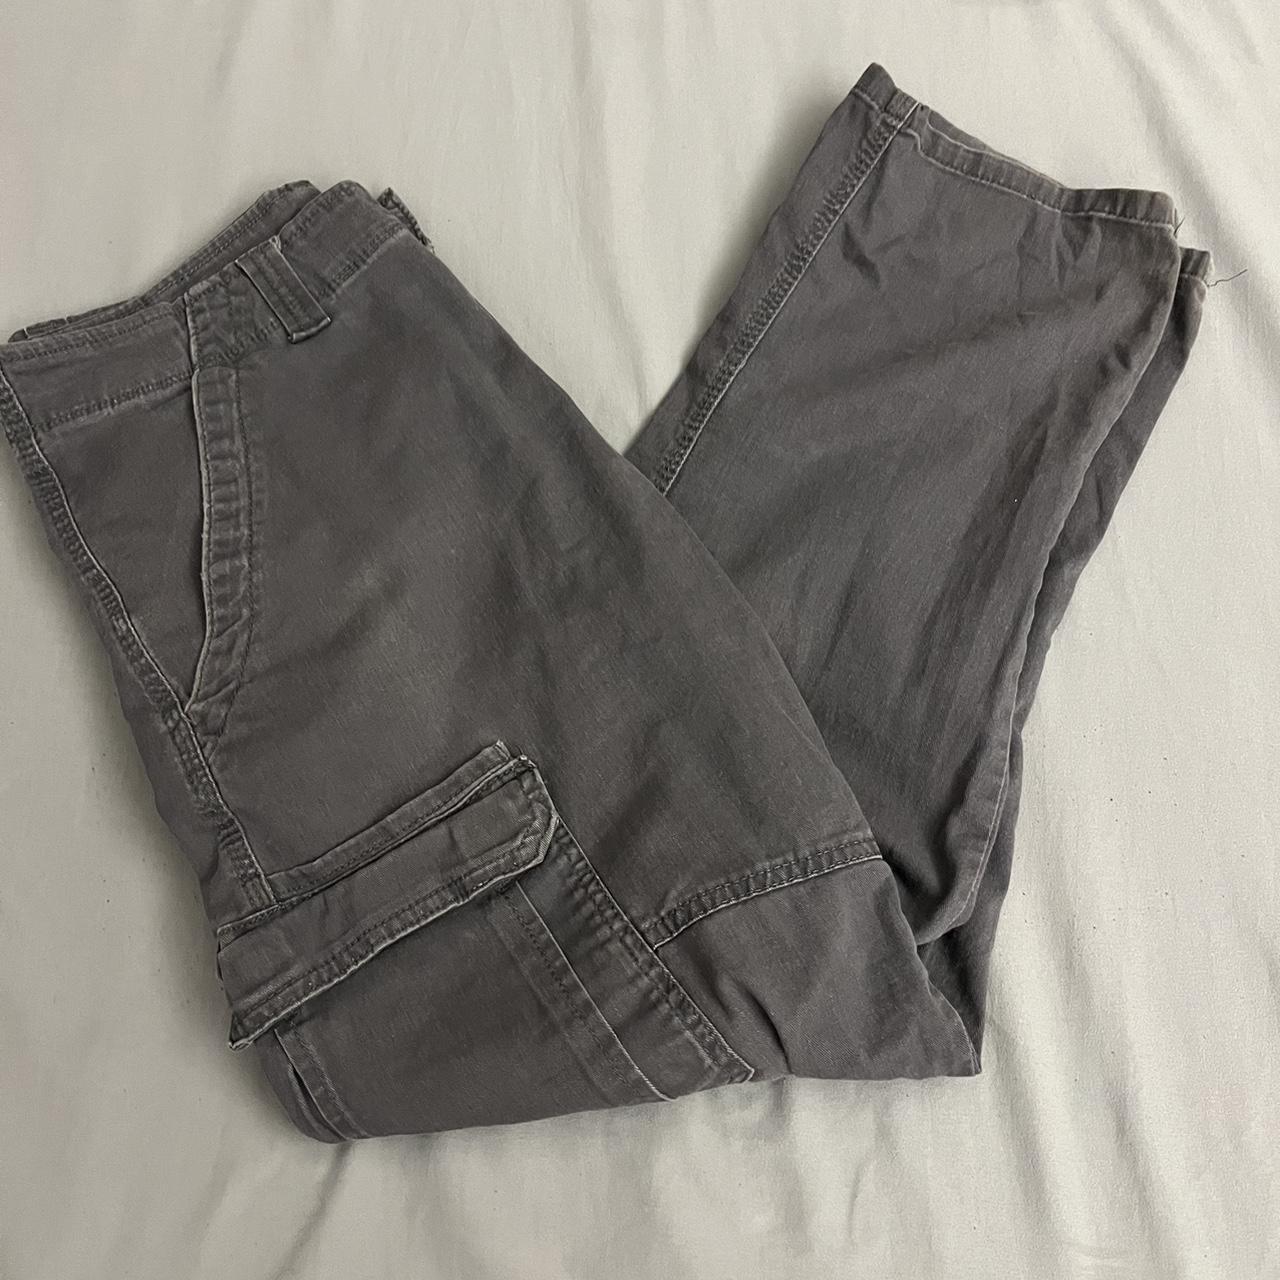 Wrangler Men's Grey and Silver Trousers